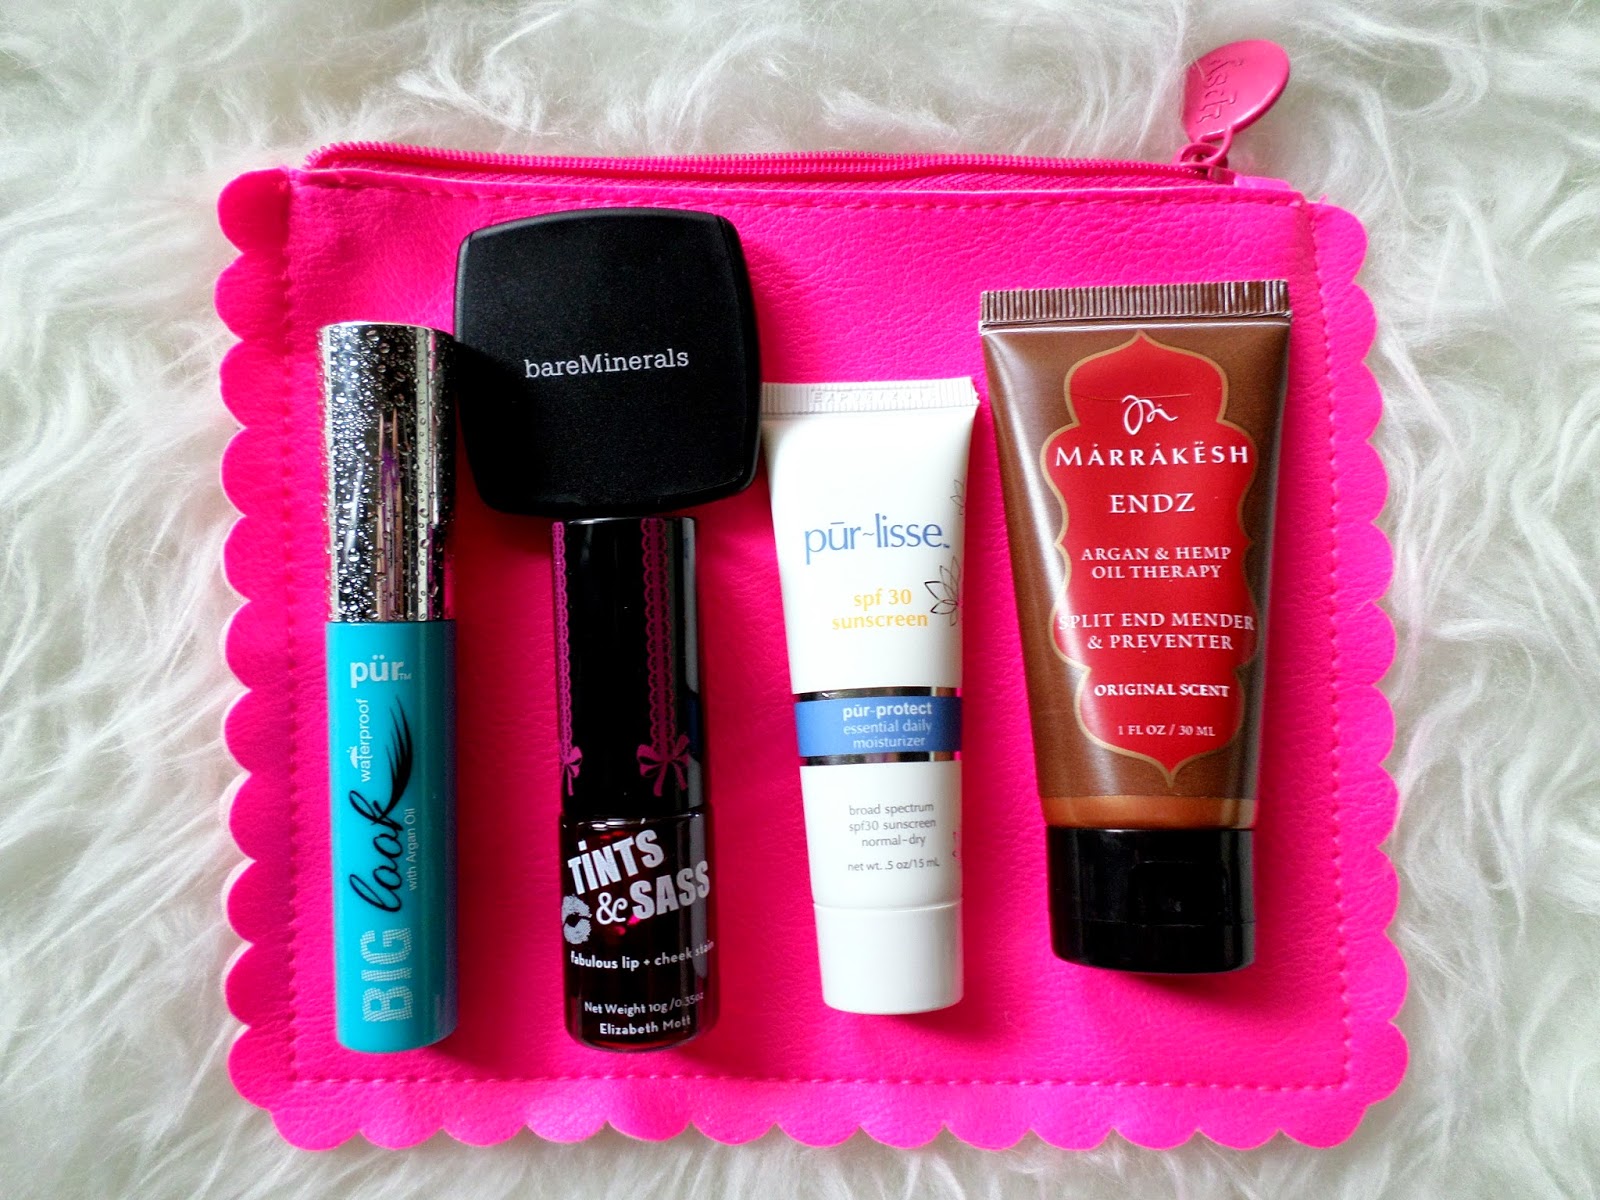 Ipsy July Glam Bag Contents